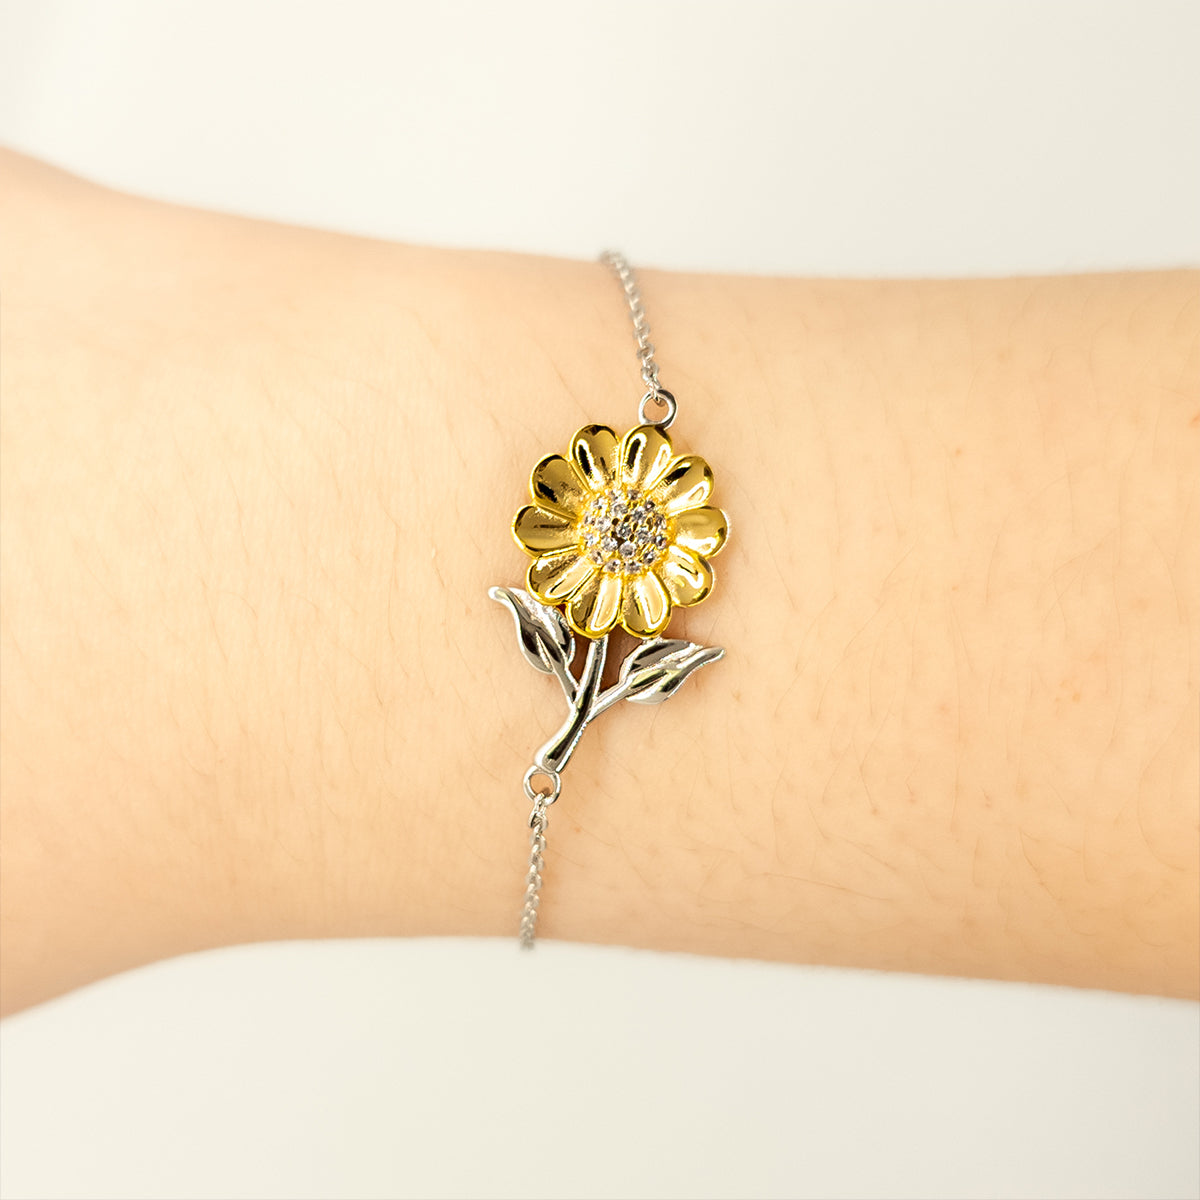 Funny Minister Mom Gifts, The best kind of MOM raises Minister, Birthday, Mother's Day, Cute Sunflower Bracelet for Minister Mom